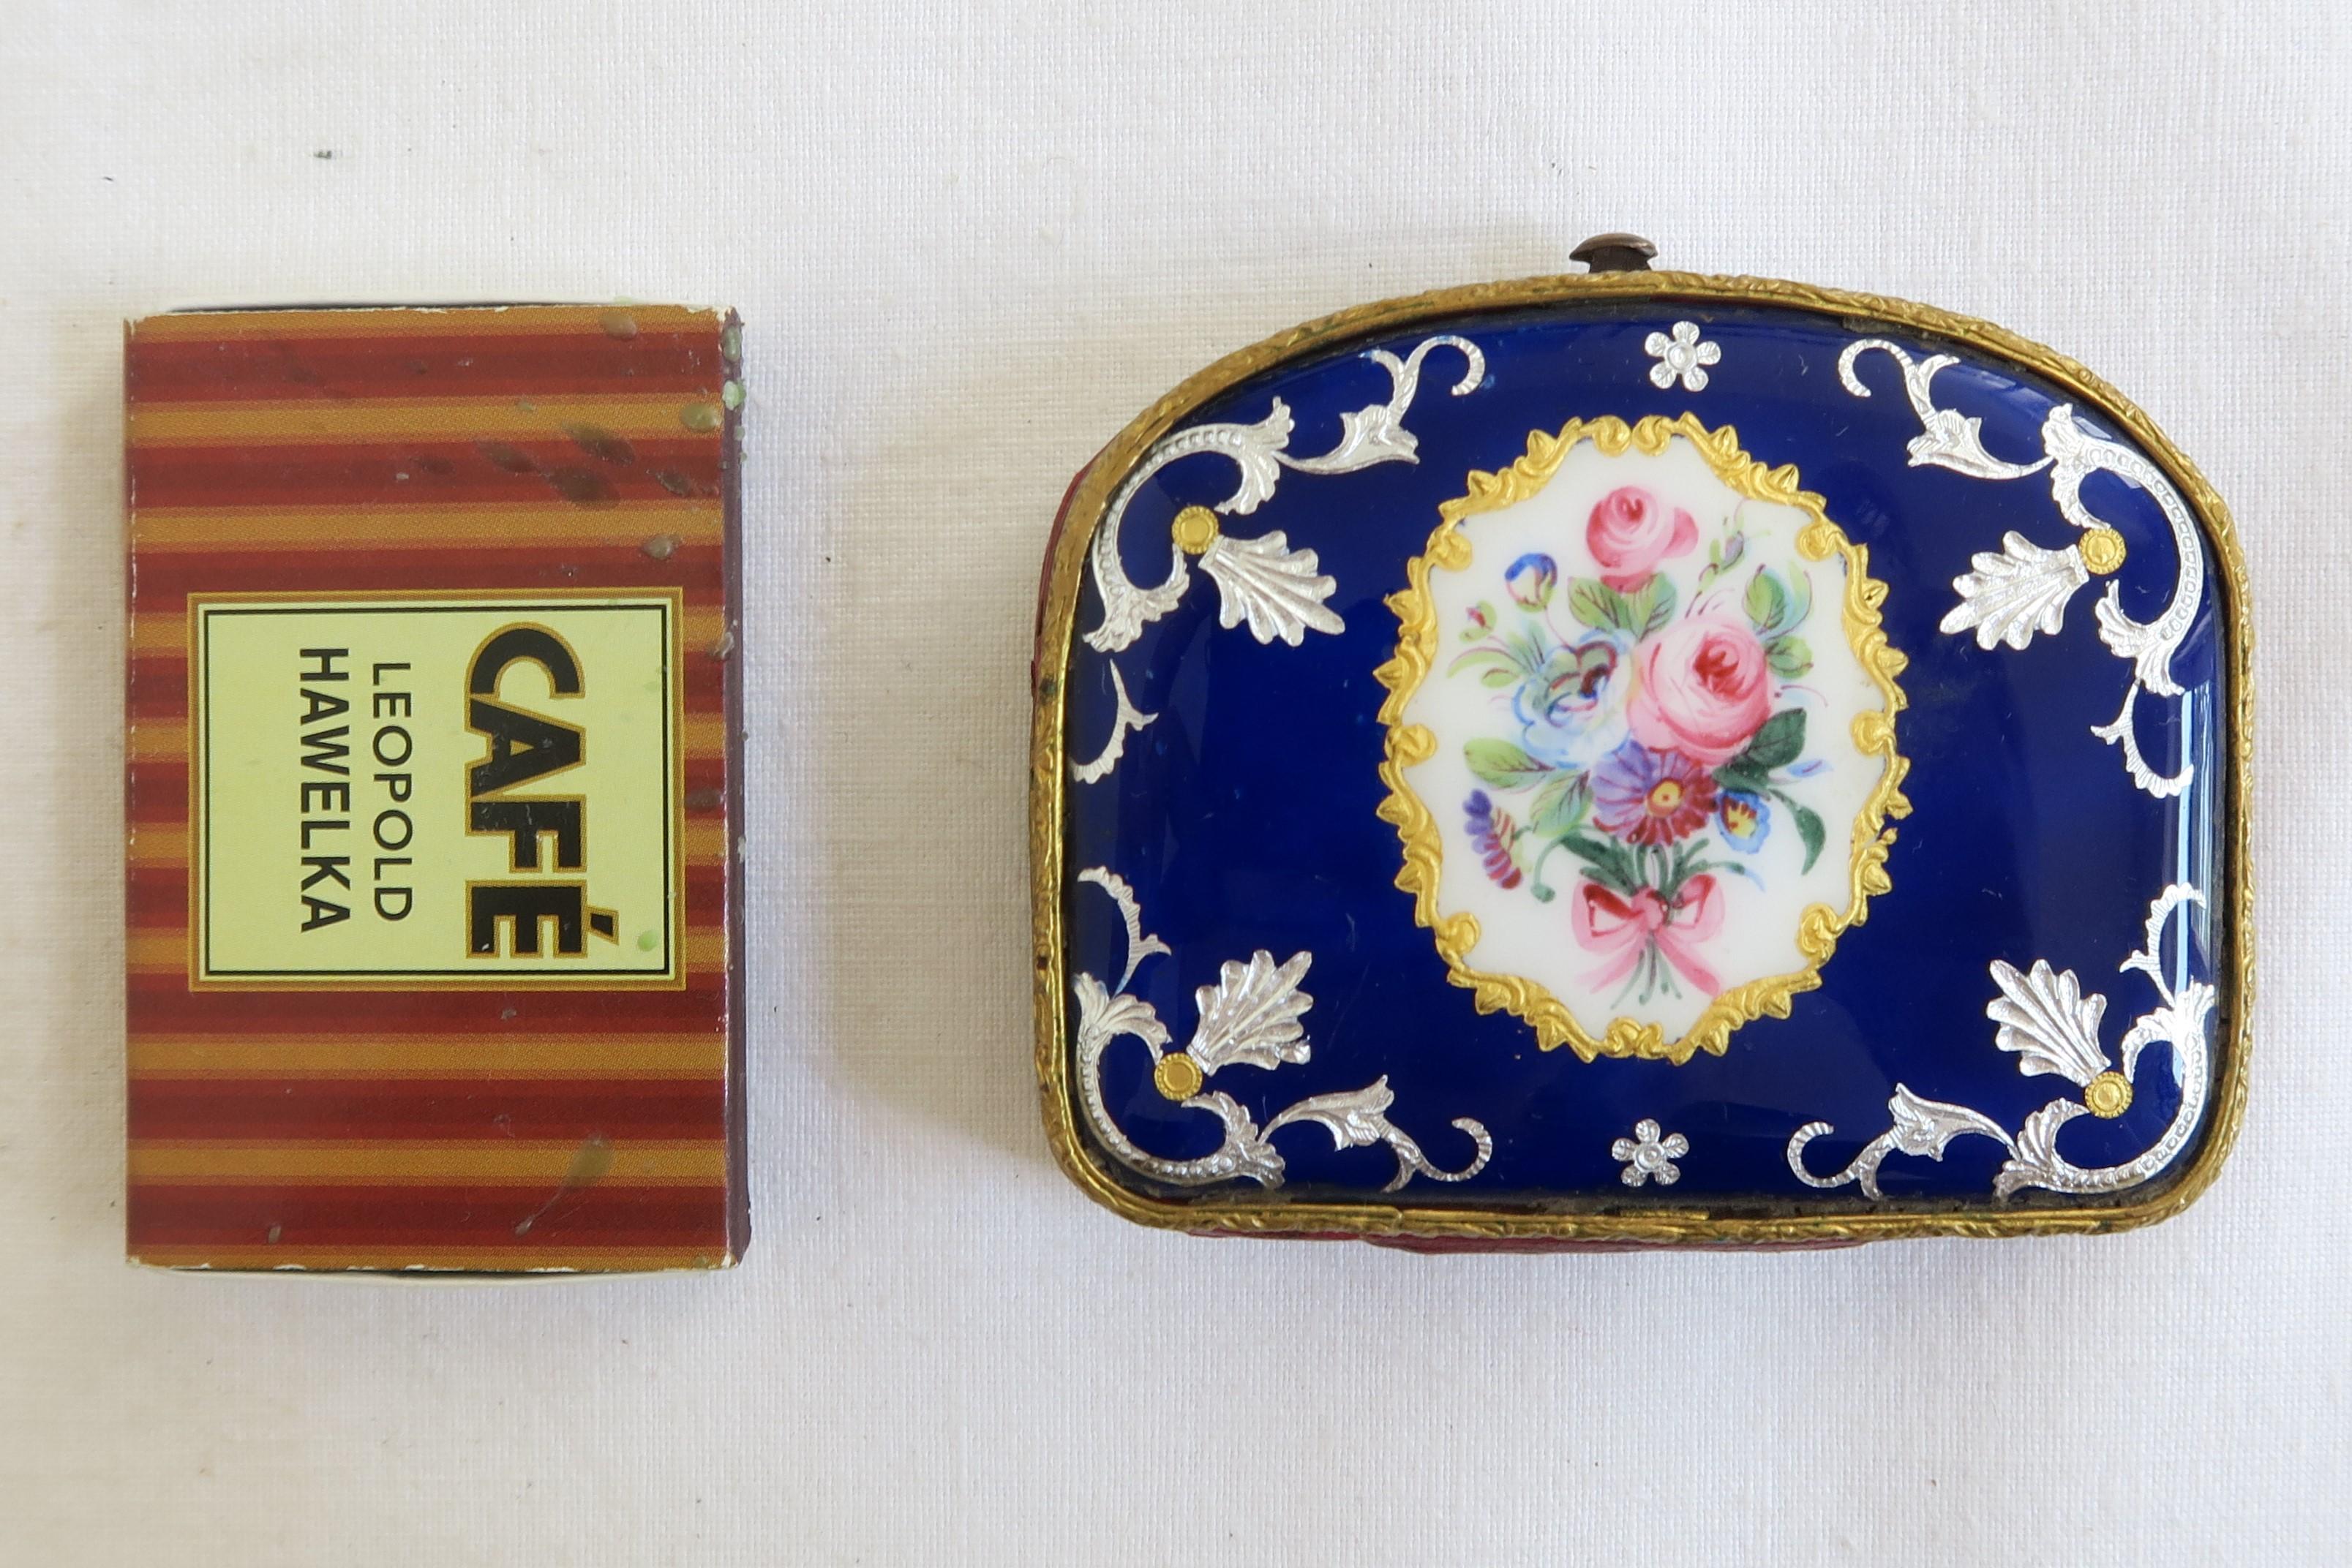 For sale is a unique little Biedermeier coin purse. Its case is made of brass covered in royal blue enamel. The lid displays an oval gold colored frame filled with white enamel with a luscious hand-painted flower bouquet in the middle. It is